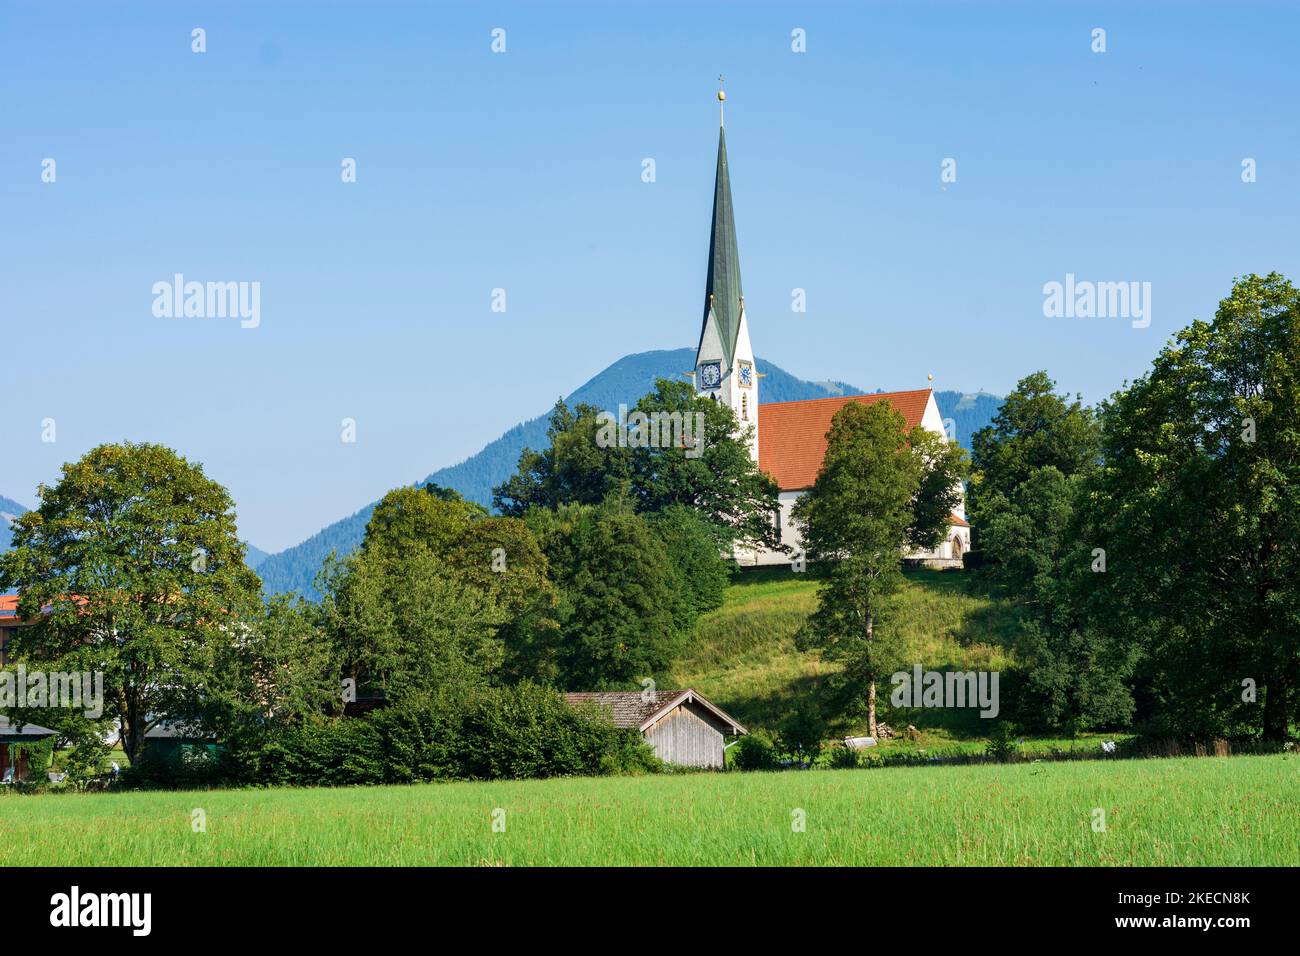 Bad Wiessee, Catholic Parish Church of the Assumption of Mary in Oberbayern, Tegernsee-Schliersee, Upper Bavaria, Bayern, Bavaria, Germany Stock Photo